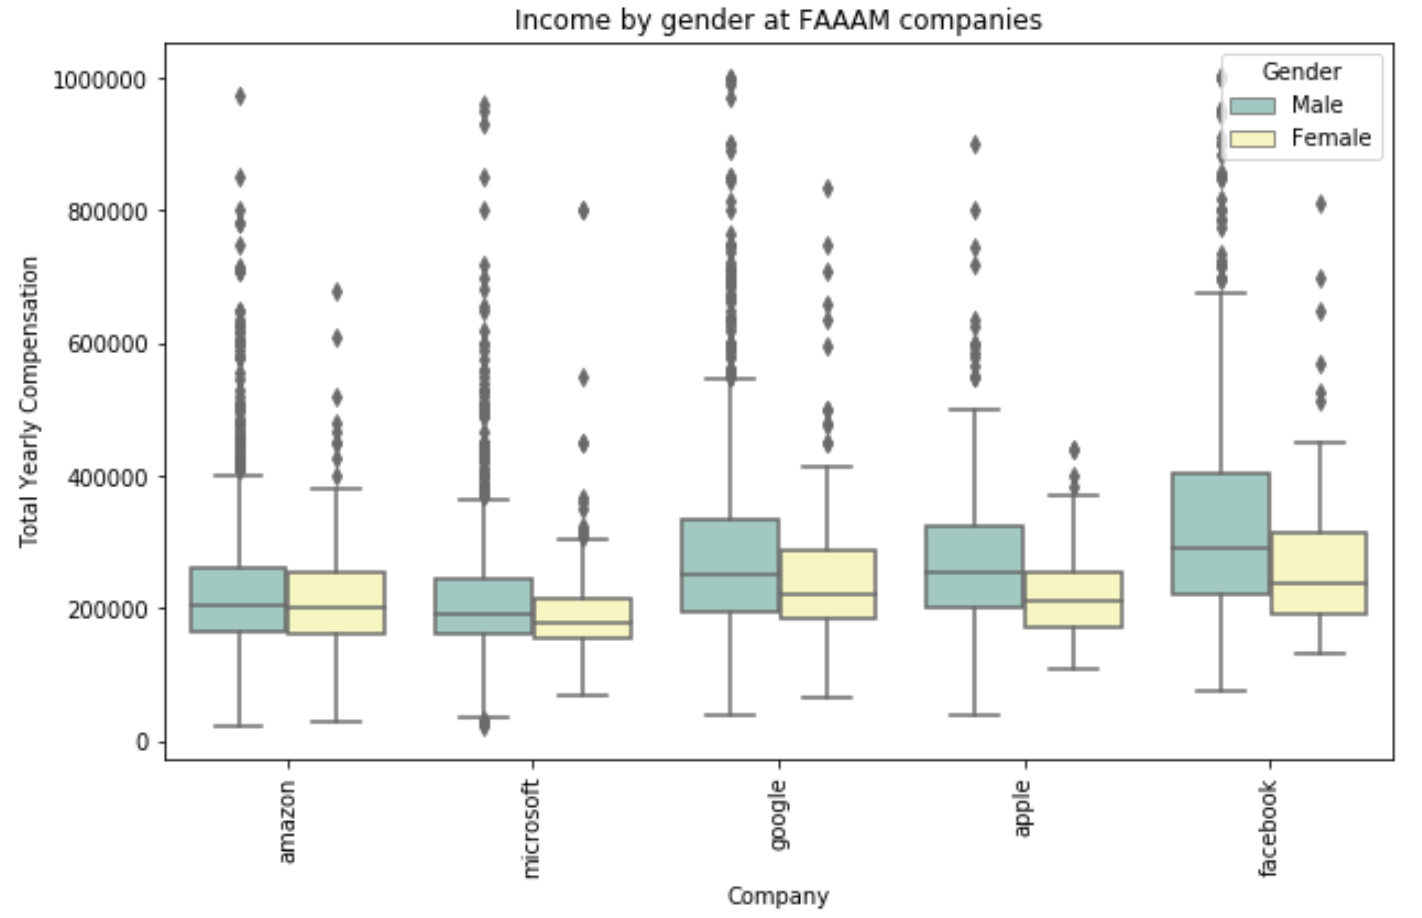 Income and gender by company